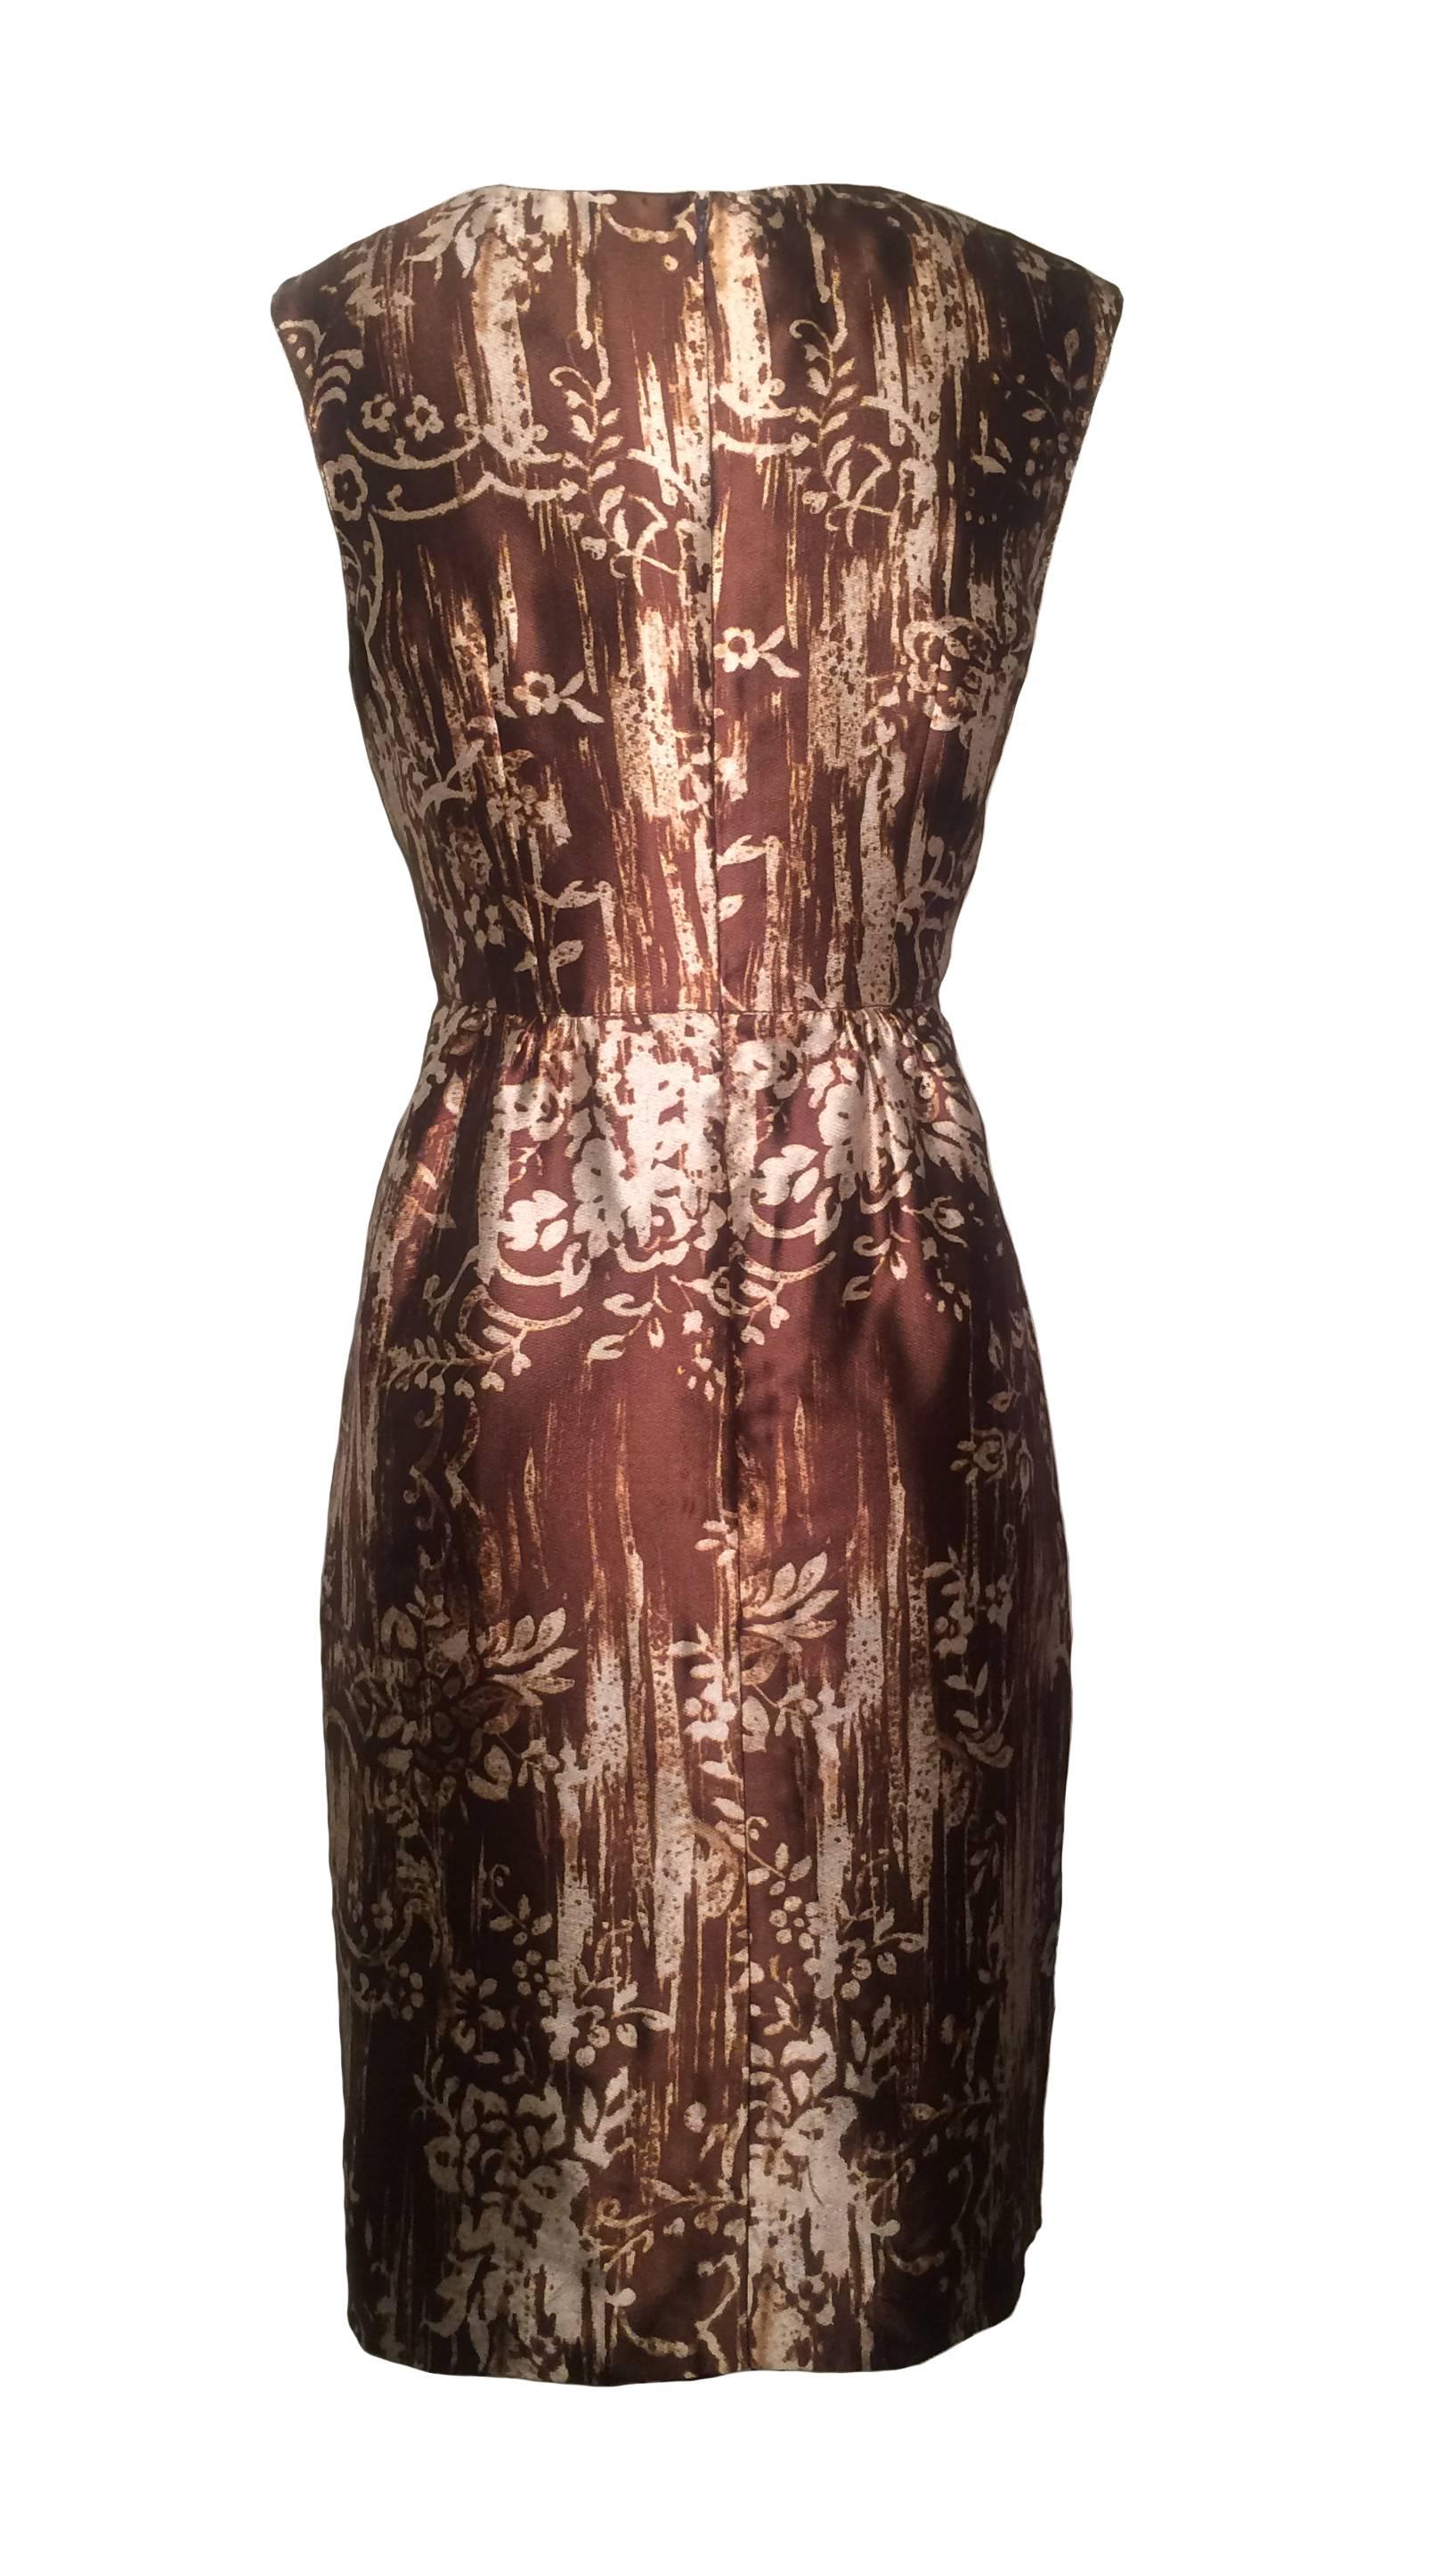 Oscar de la Renta brown and tan floral print silk shift dress with keyhole detail at chest. Back zip and hook and eye.

100% silk.
Made in Italy.

Labelled size 6.
Bust 36